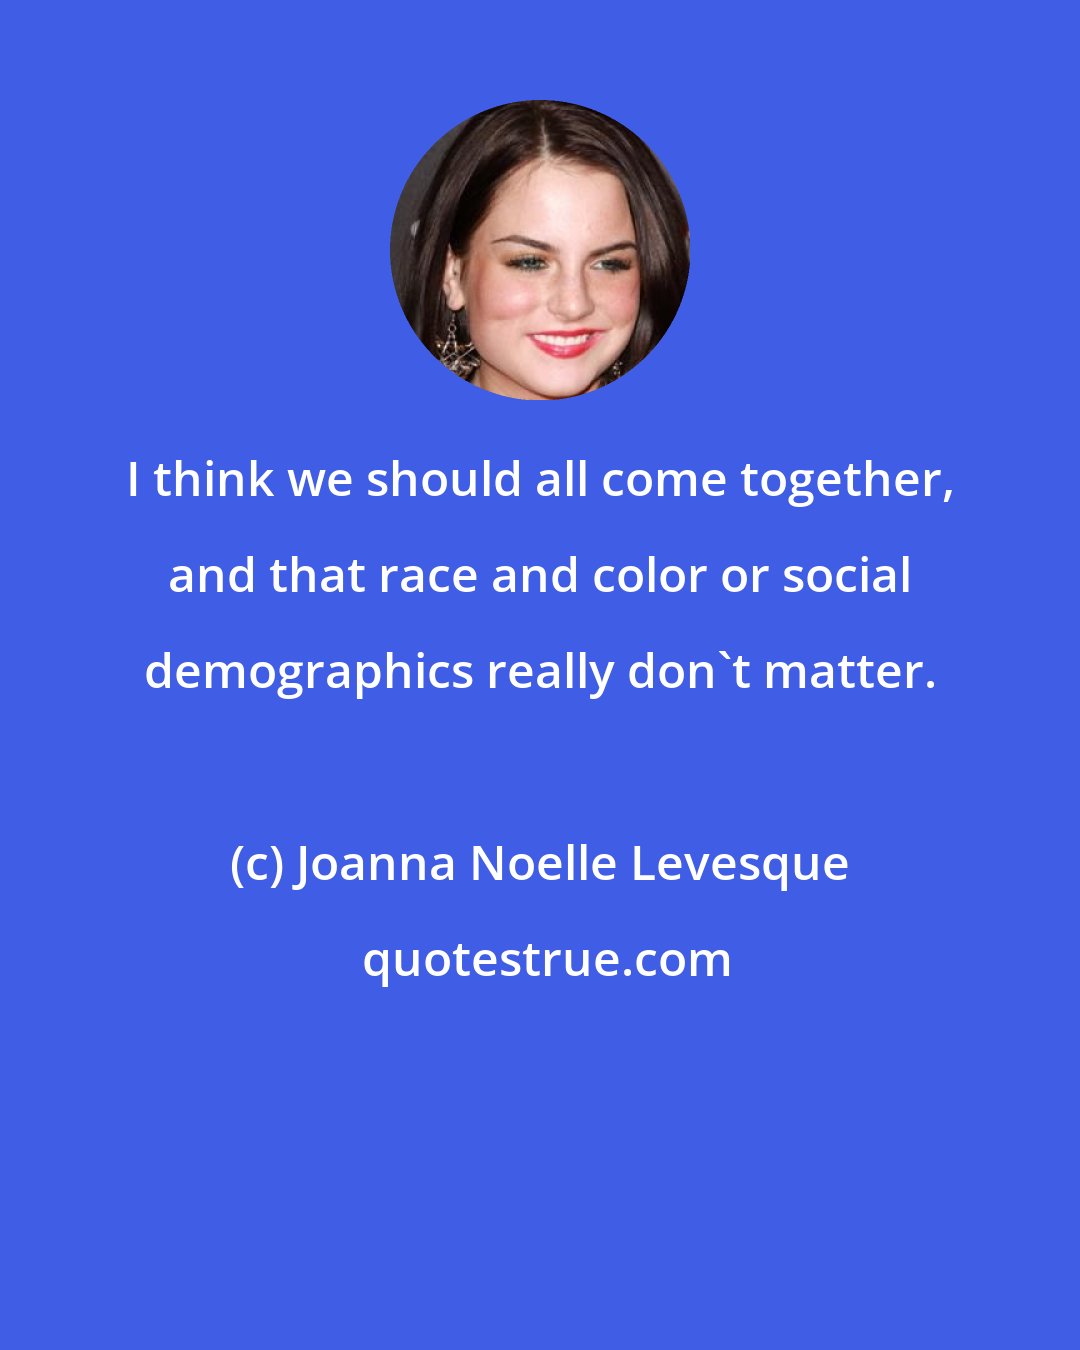 Joanna Noelle Levesque: I think we should all come together, and that race and color or social demographics really don't matter.